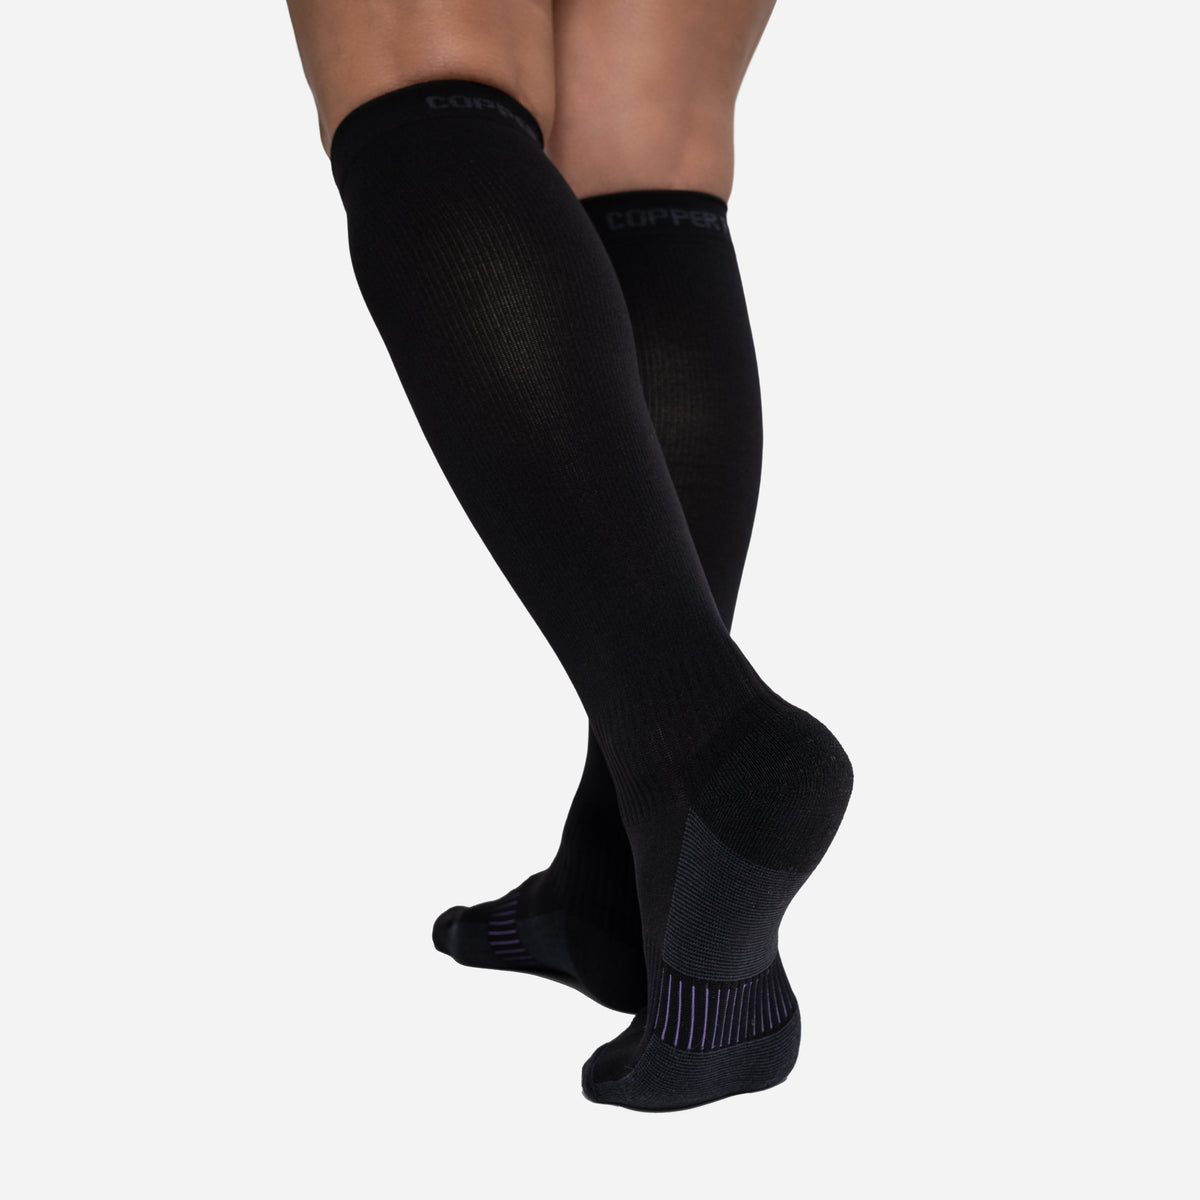 Socks Tights 40 DEN Curvy and Plus Size Graduated Compression